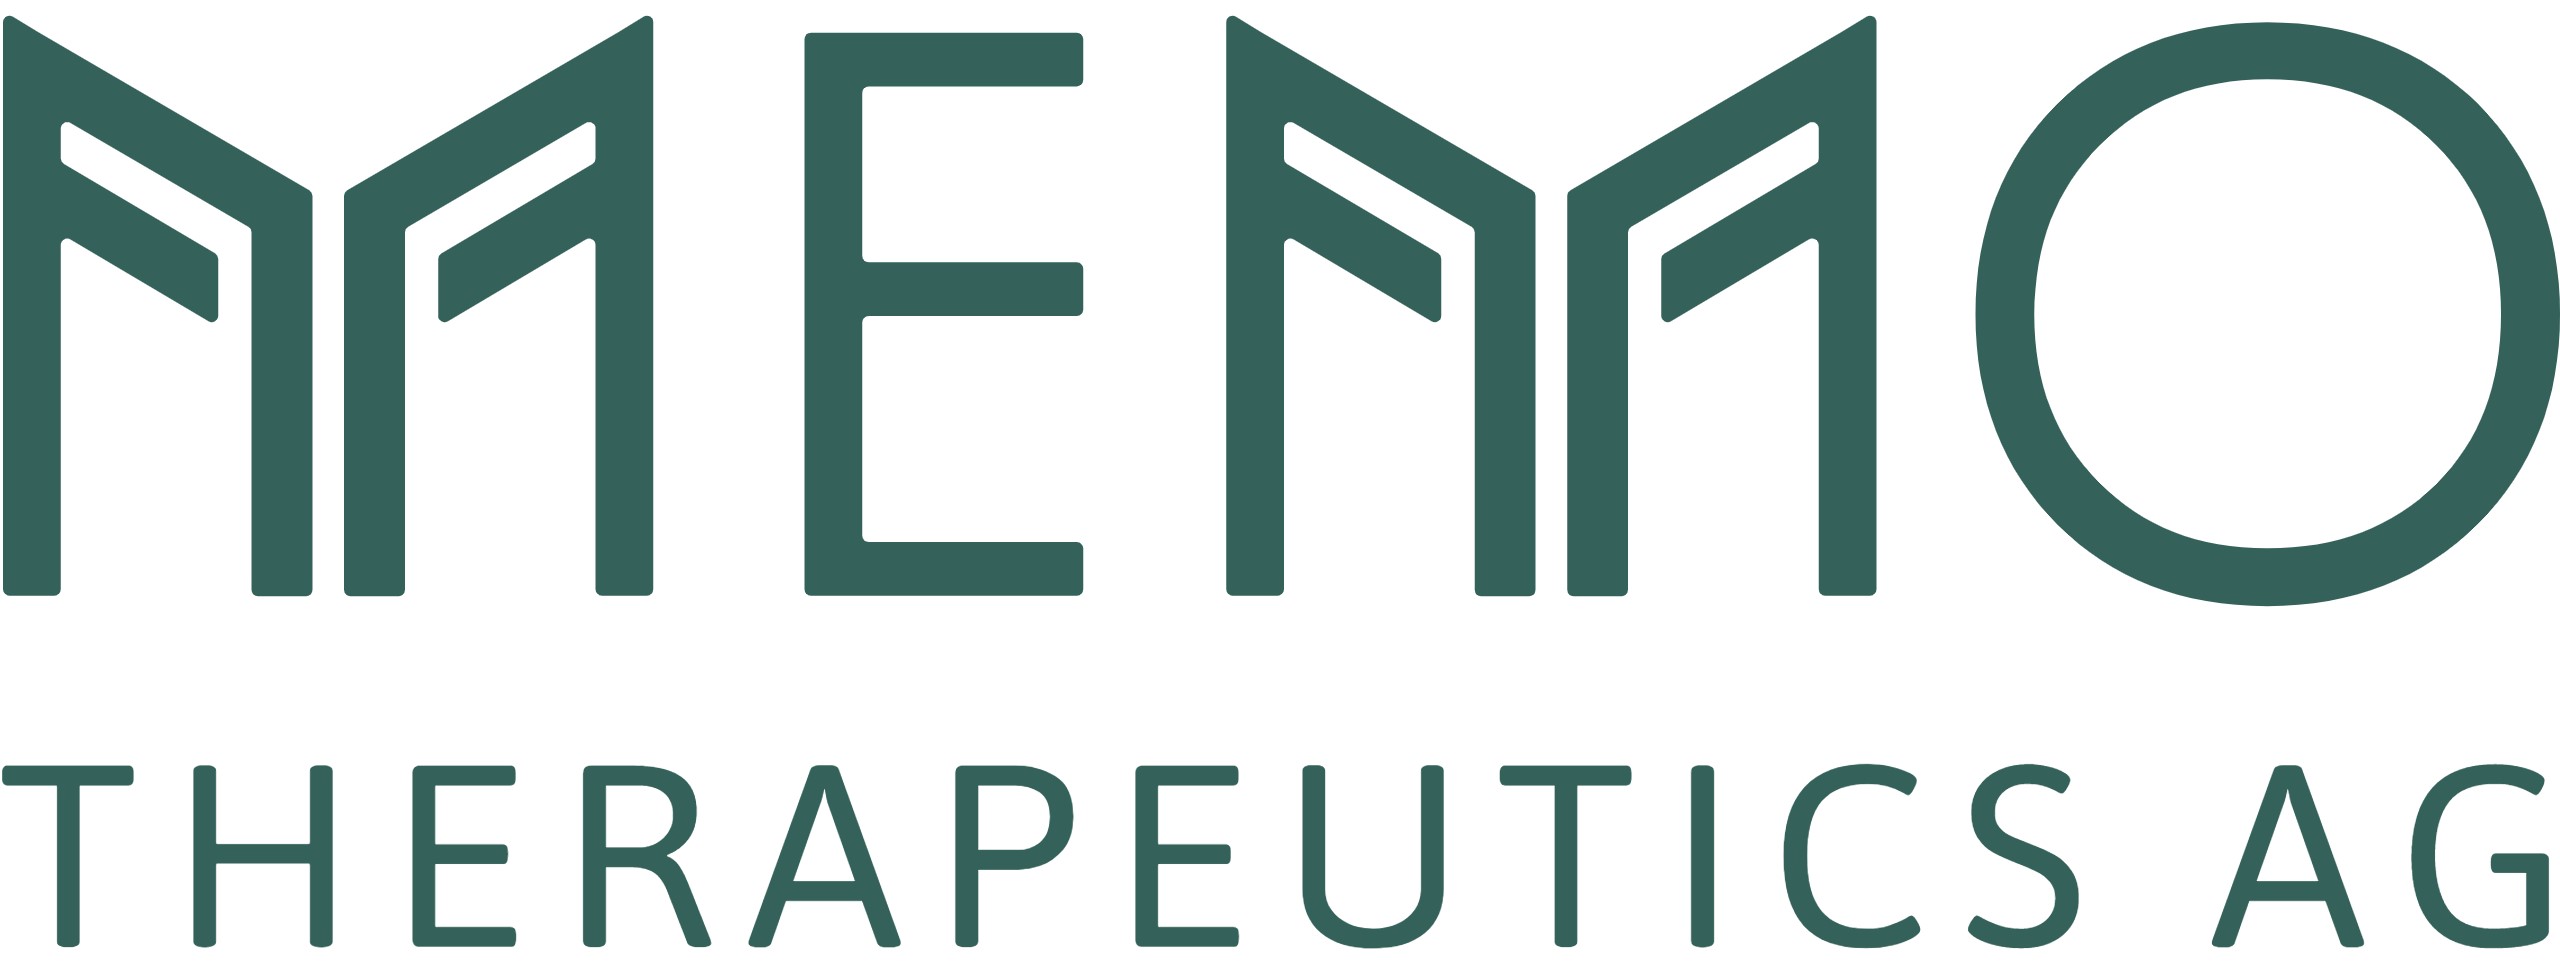 Memo Therapeutics AG appoints Paul Carter as Chairperson - GlobeNewswire